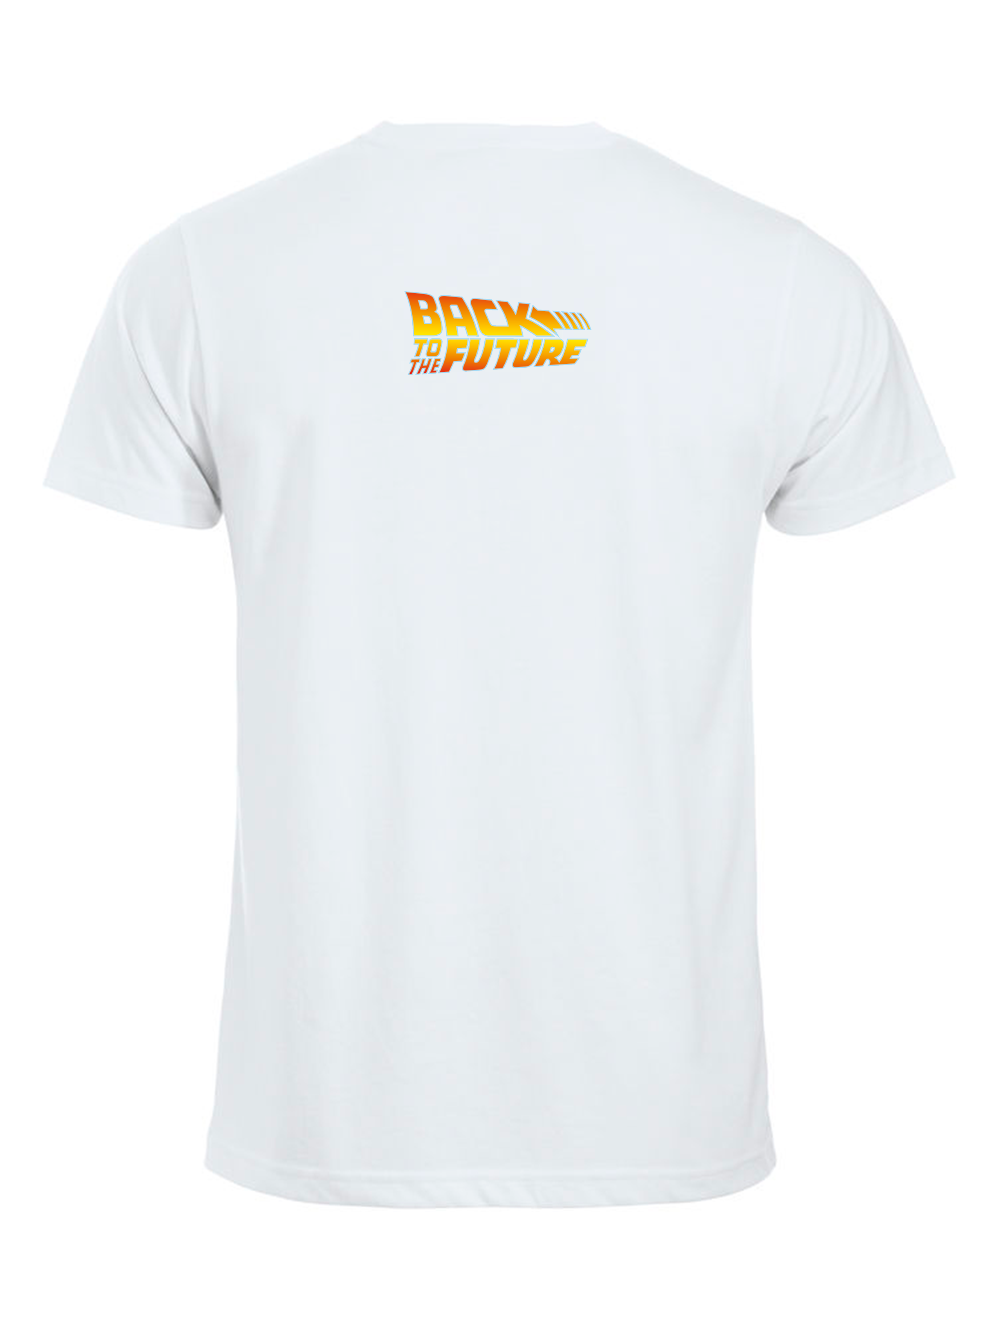 BACK TO THE FUTURE T-SHIRT